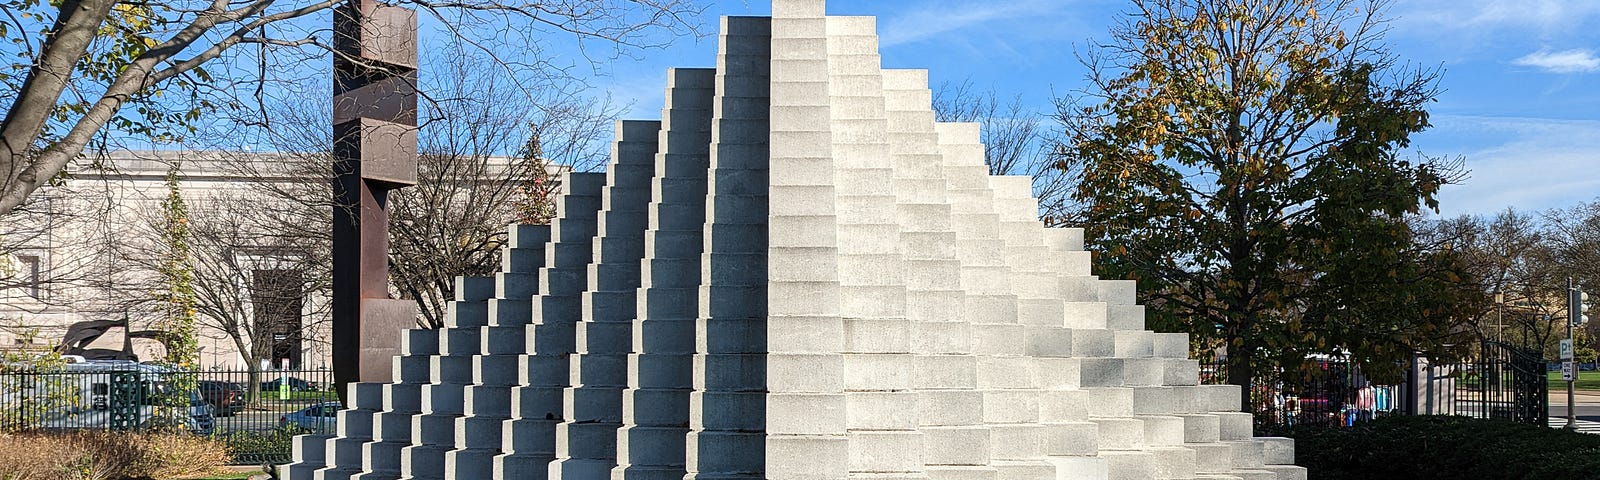 Pyramid shaped sculpture made up of hundreds of cement blocks